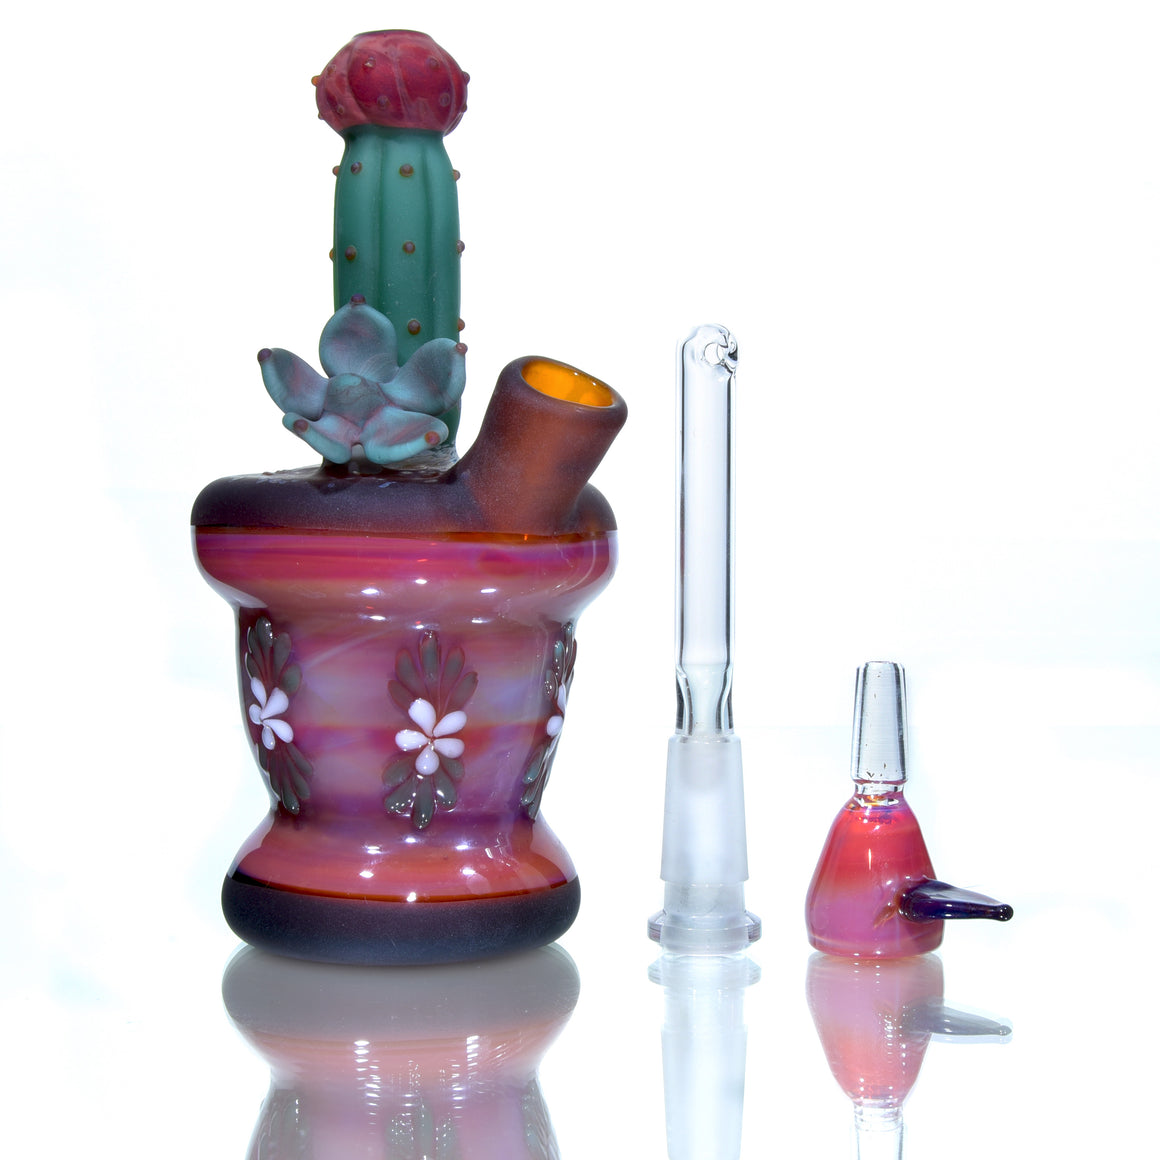 Frosted Floral Pattern Vase Mini Tube w/ Removable Downstem - Echeveria & Moon Cactus - 10mm Female